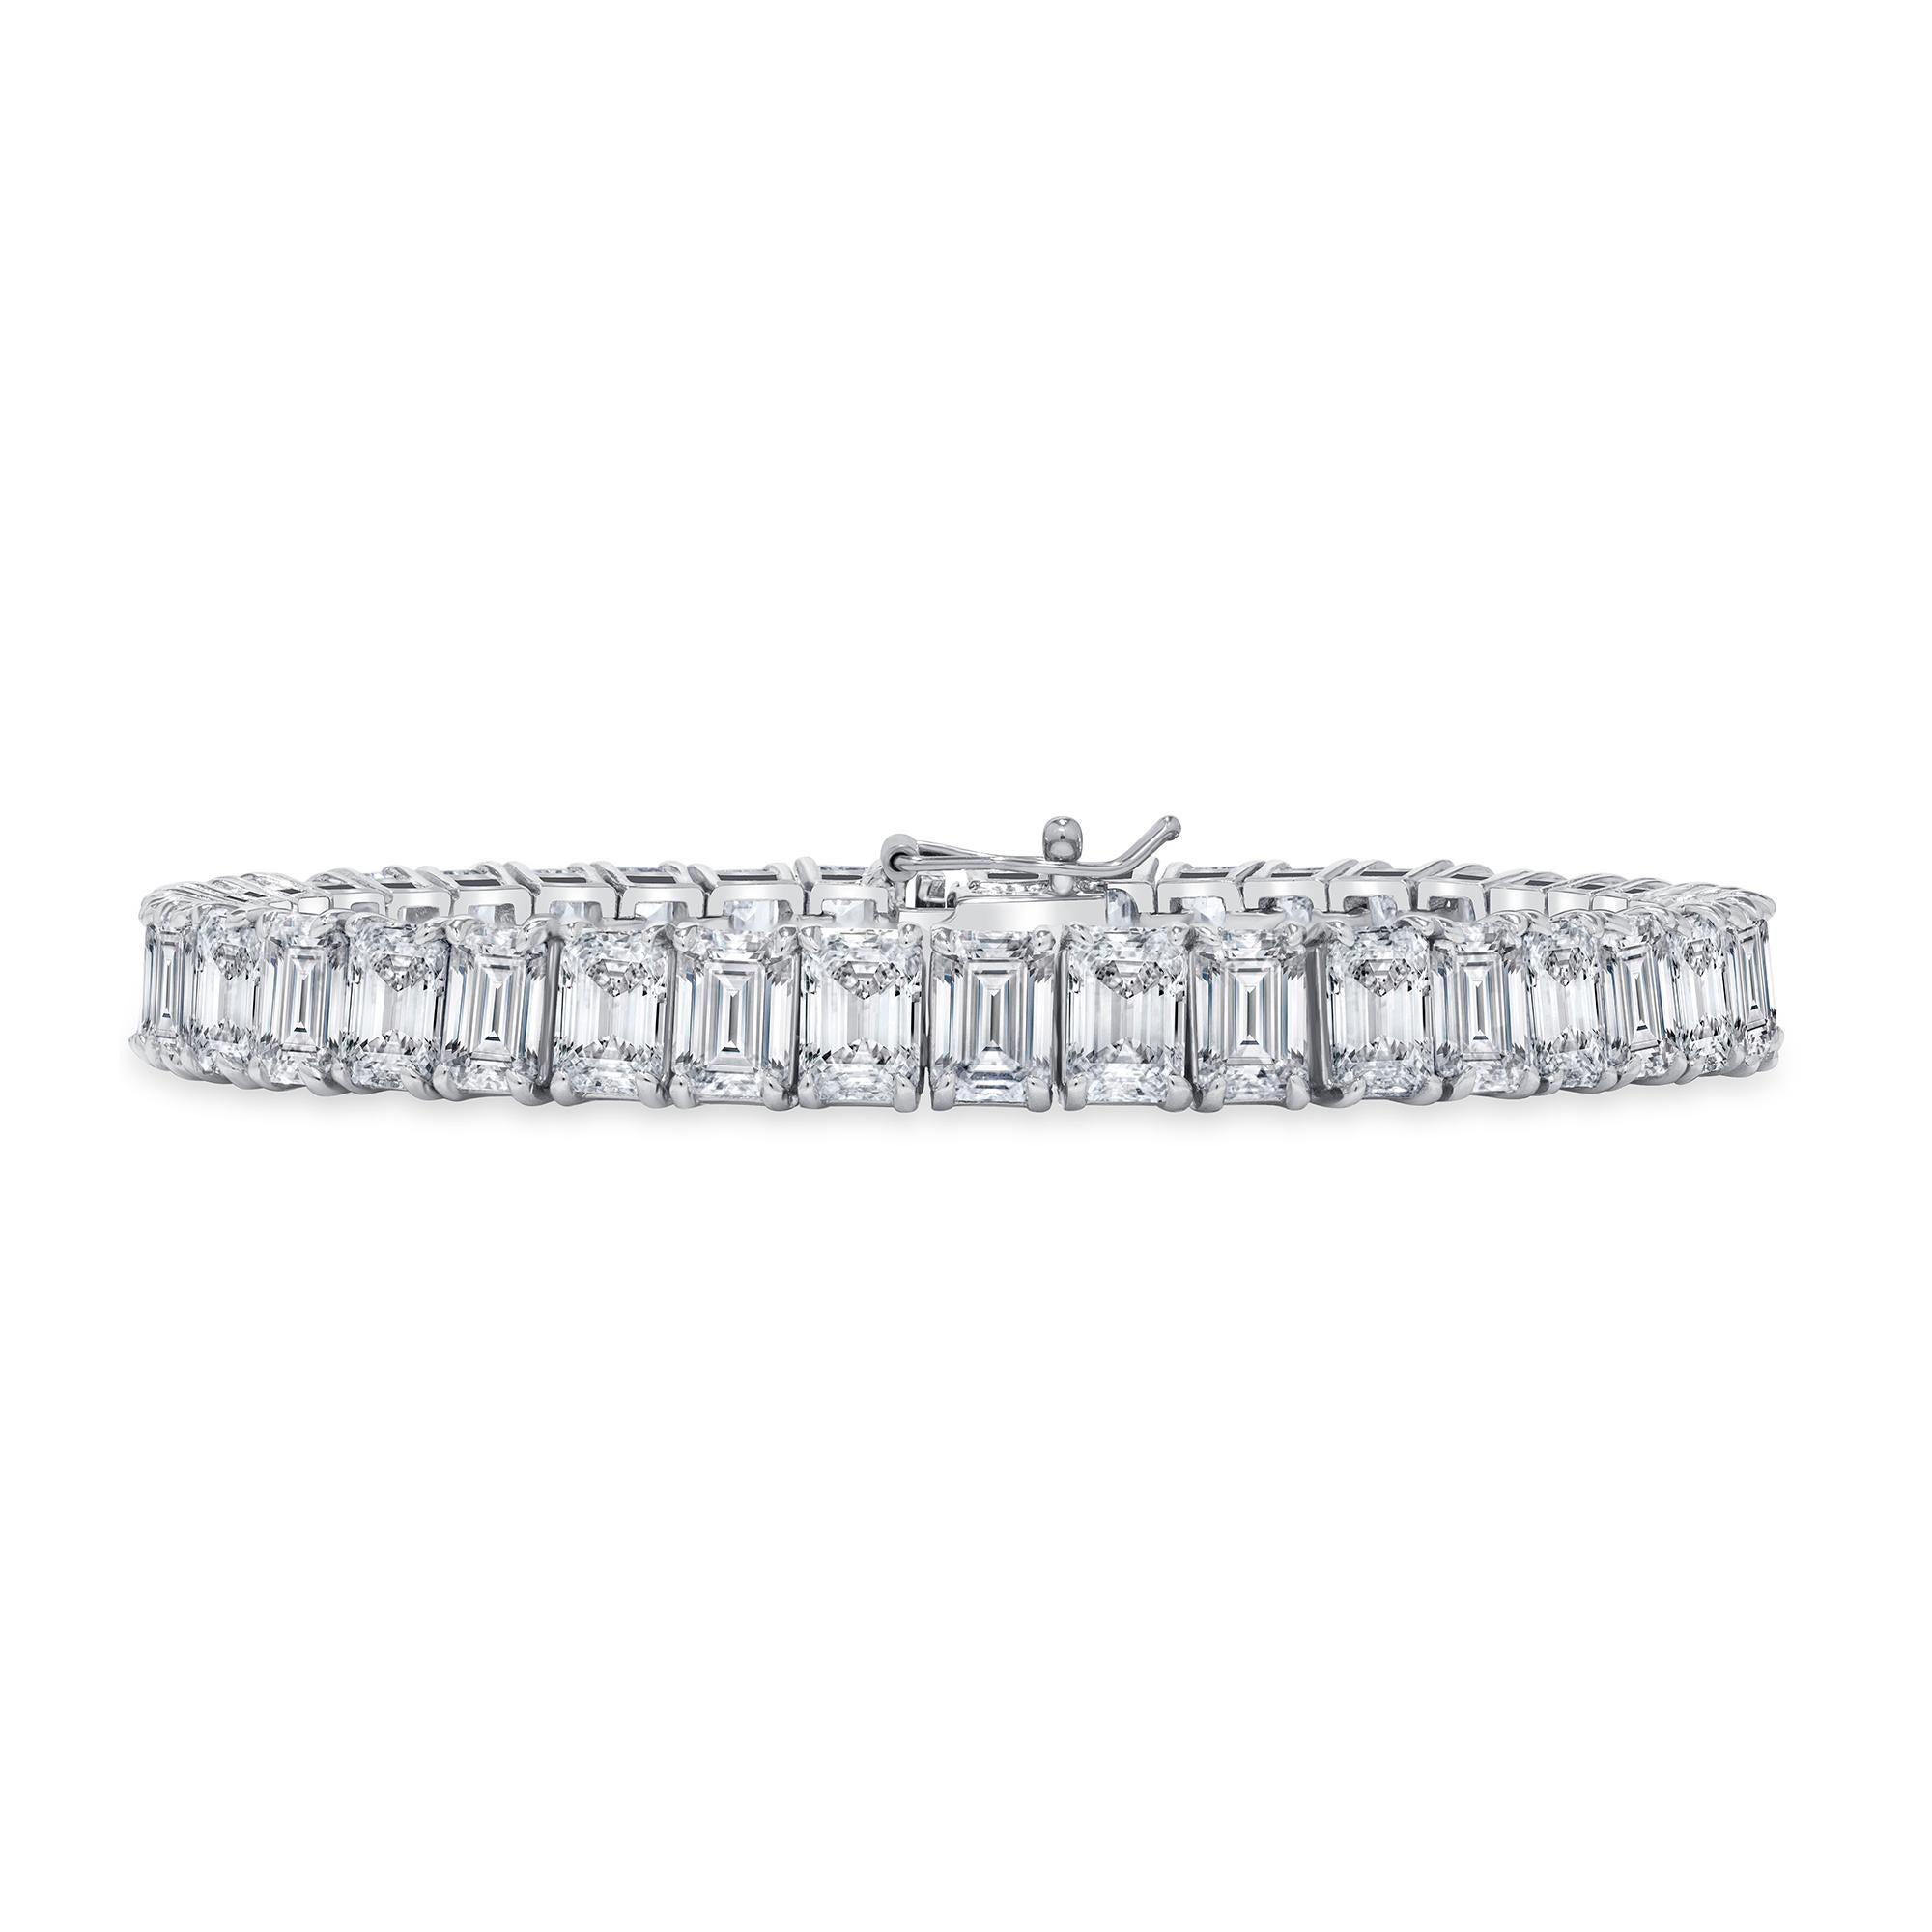 This Emerald Cut diamond tennis bracelet is exquisite. The focal point of this bracelet is the captivating 21.50 carat total weight Emerald Cut Lab diamonds. Each diamond is meticulously selected to match and set in a high polish 14k or 18k gold. It